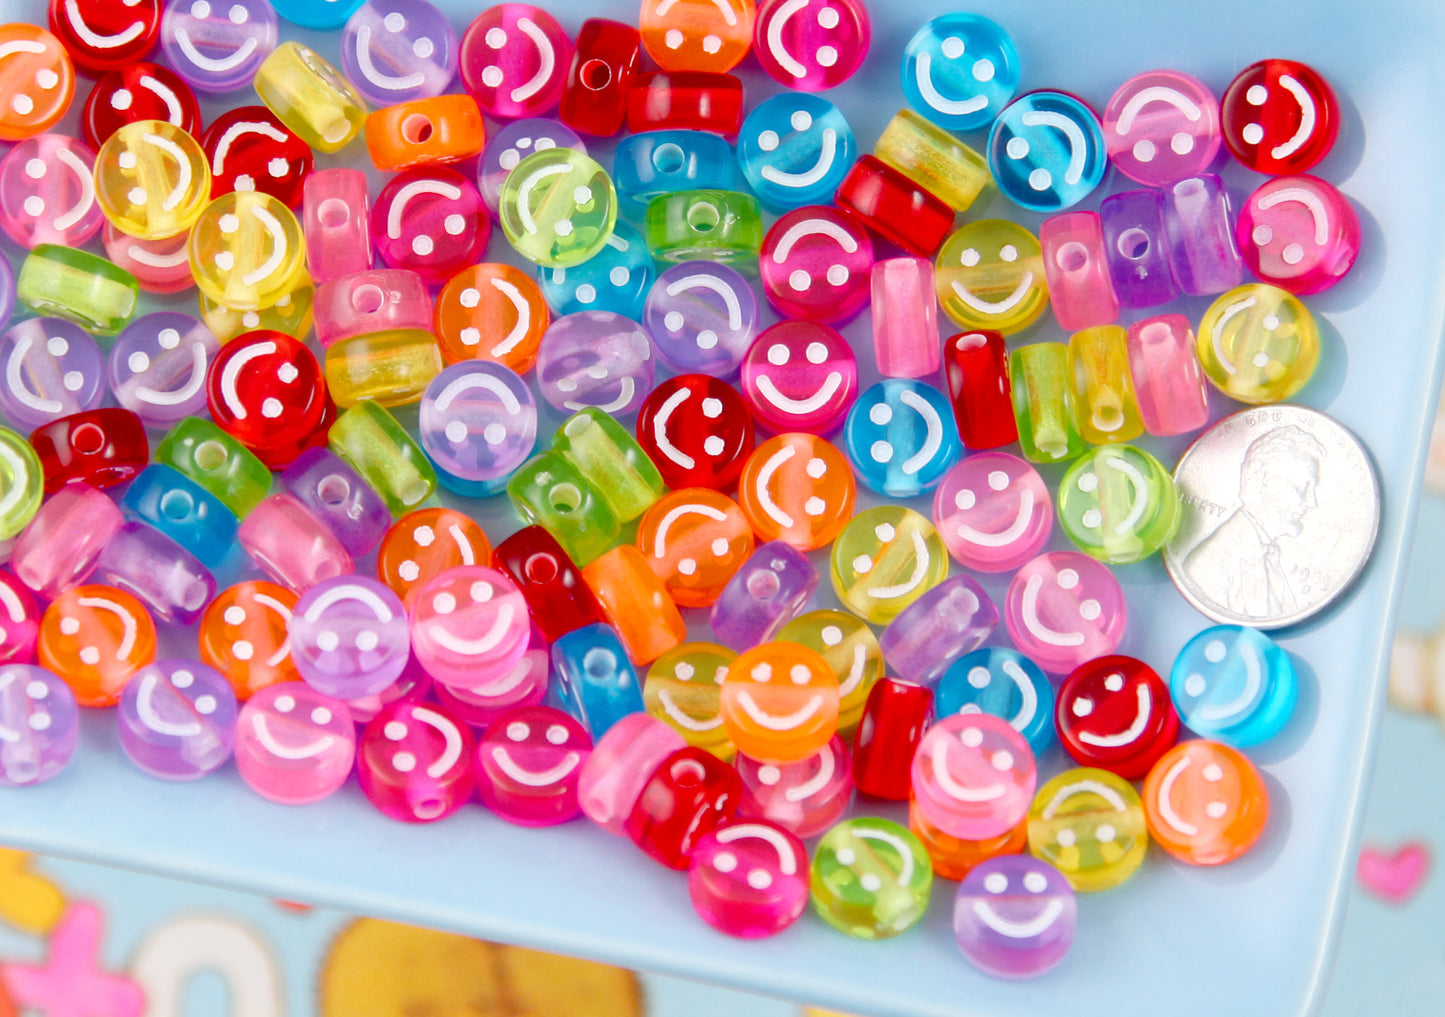 10mm Acrylic Heart Smiley Face Beads, High Quality Beads, Focal